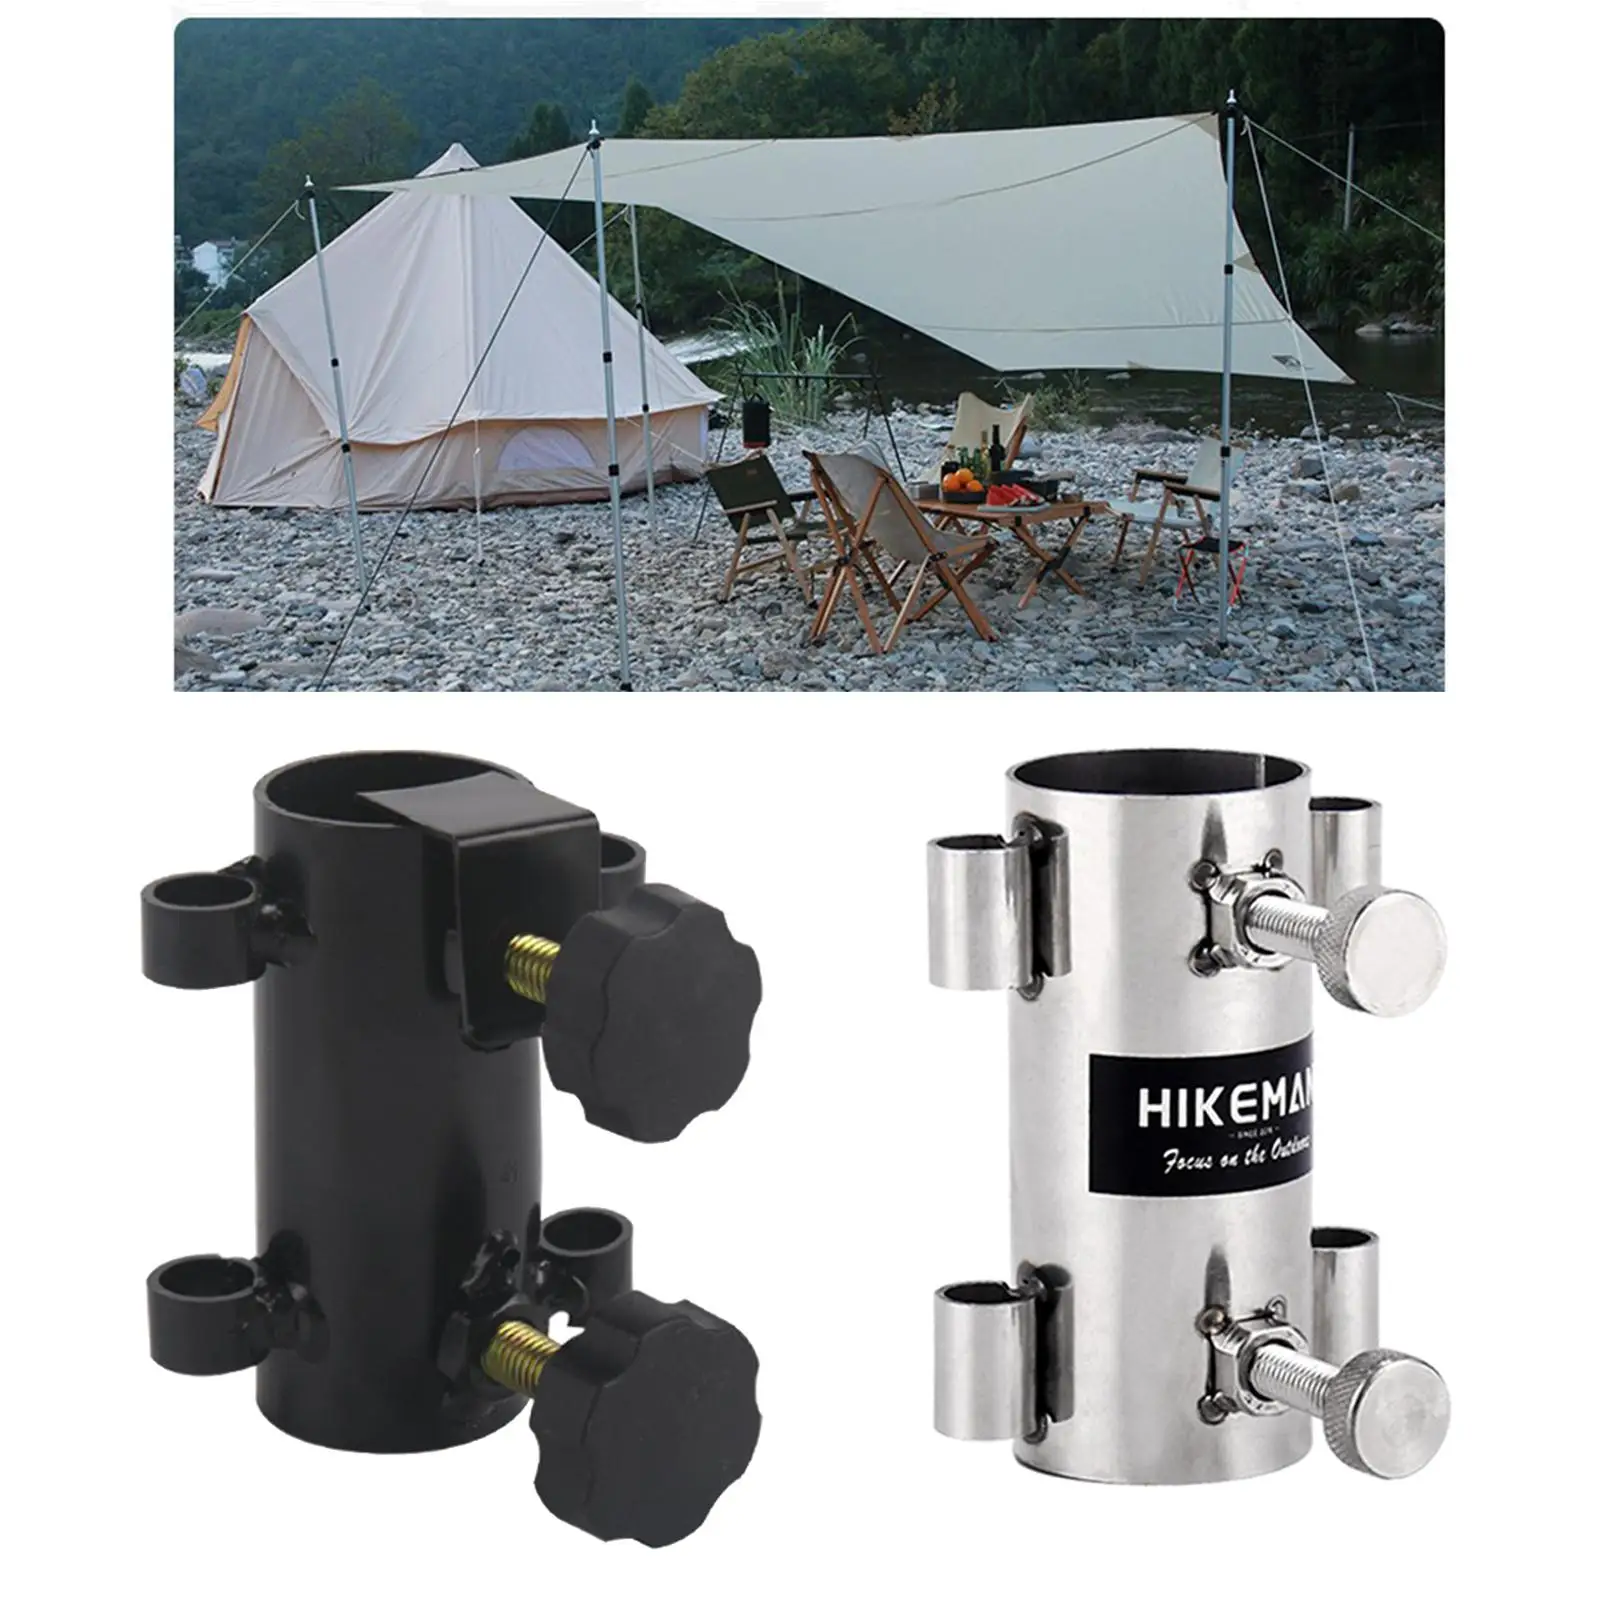 Outdoor Canopy Rod Holder Awning Tent Pegs Stand Fits for the Most Rods